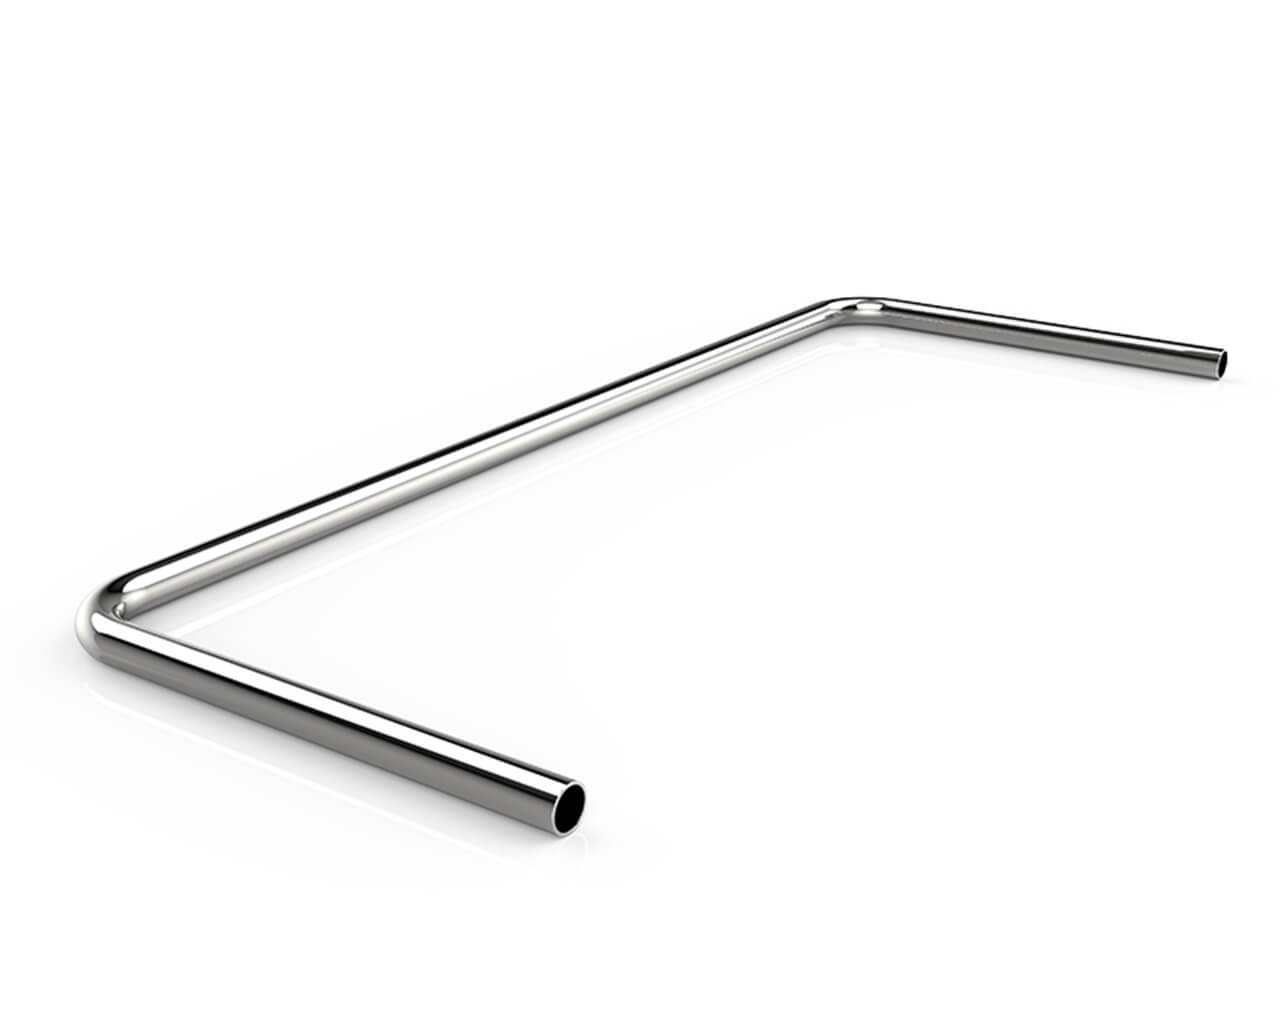 Bykski Double Metal Pre-Bent Rigid Tubing - Chrome Plated Copper - 14mm OD - 500mm/200mm - PrimoChill - KEEPING IT COOL